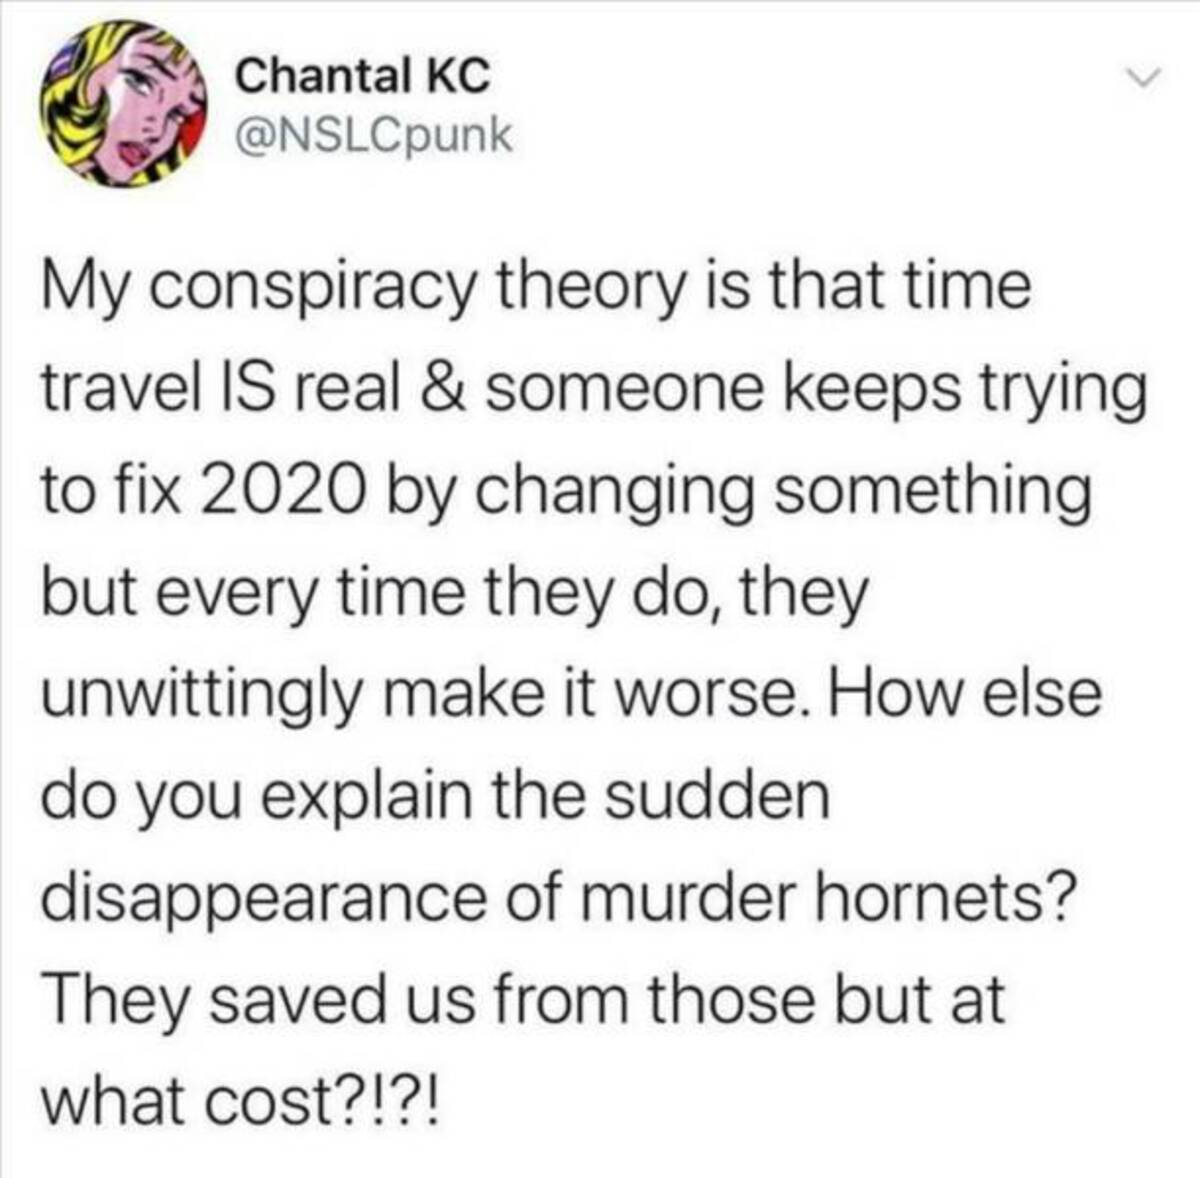 screenshot - Chantal Kc My conspiracy theory is that time travel Is real & someone keeps trying to fix 2020 by changing something but every time they do, they unwittingly make it worse. How else. do you explain the sudden disappearance of murder hornets? 